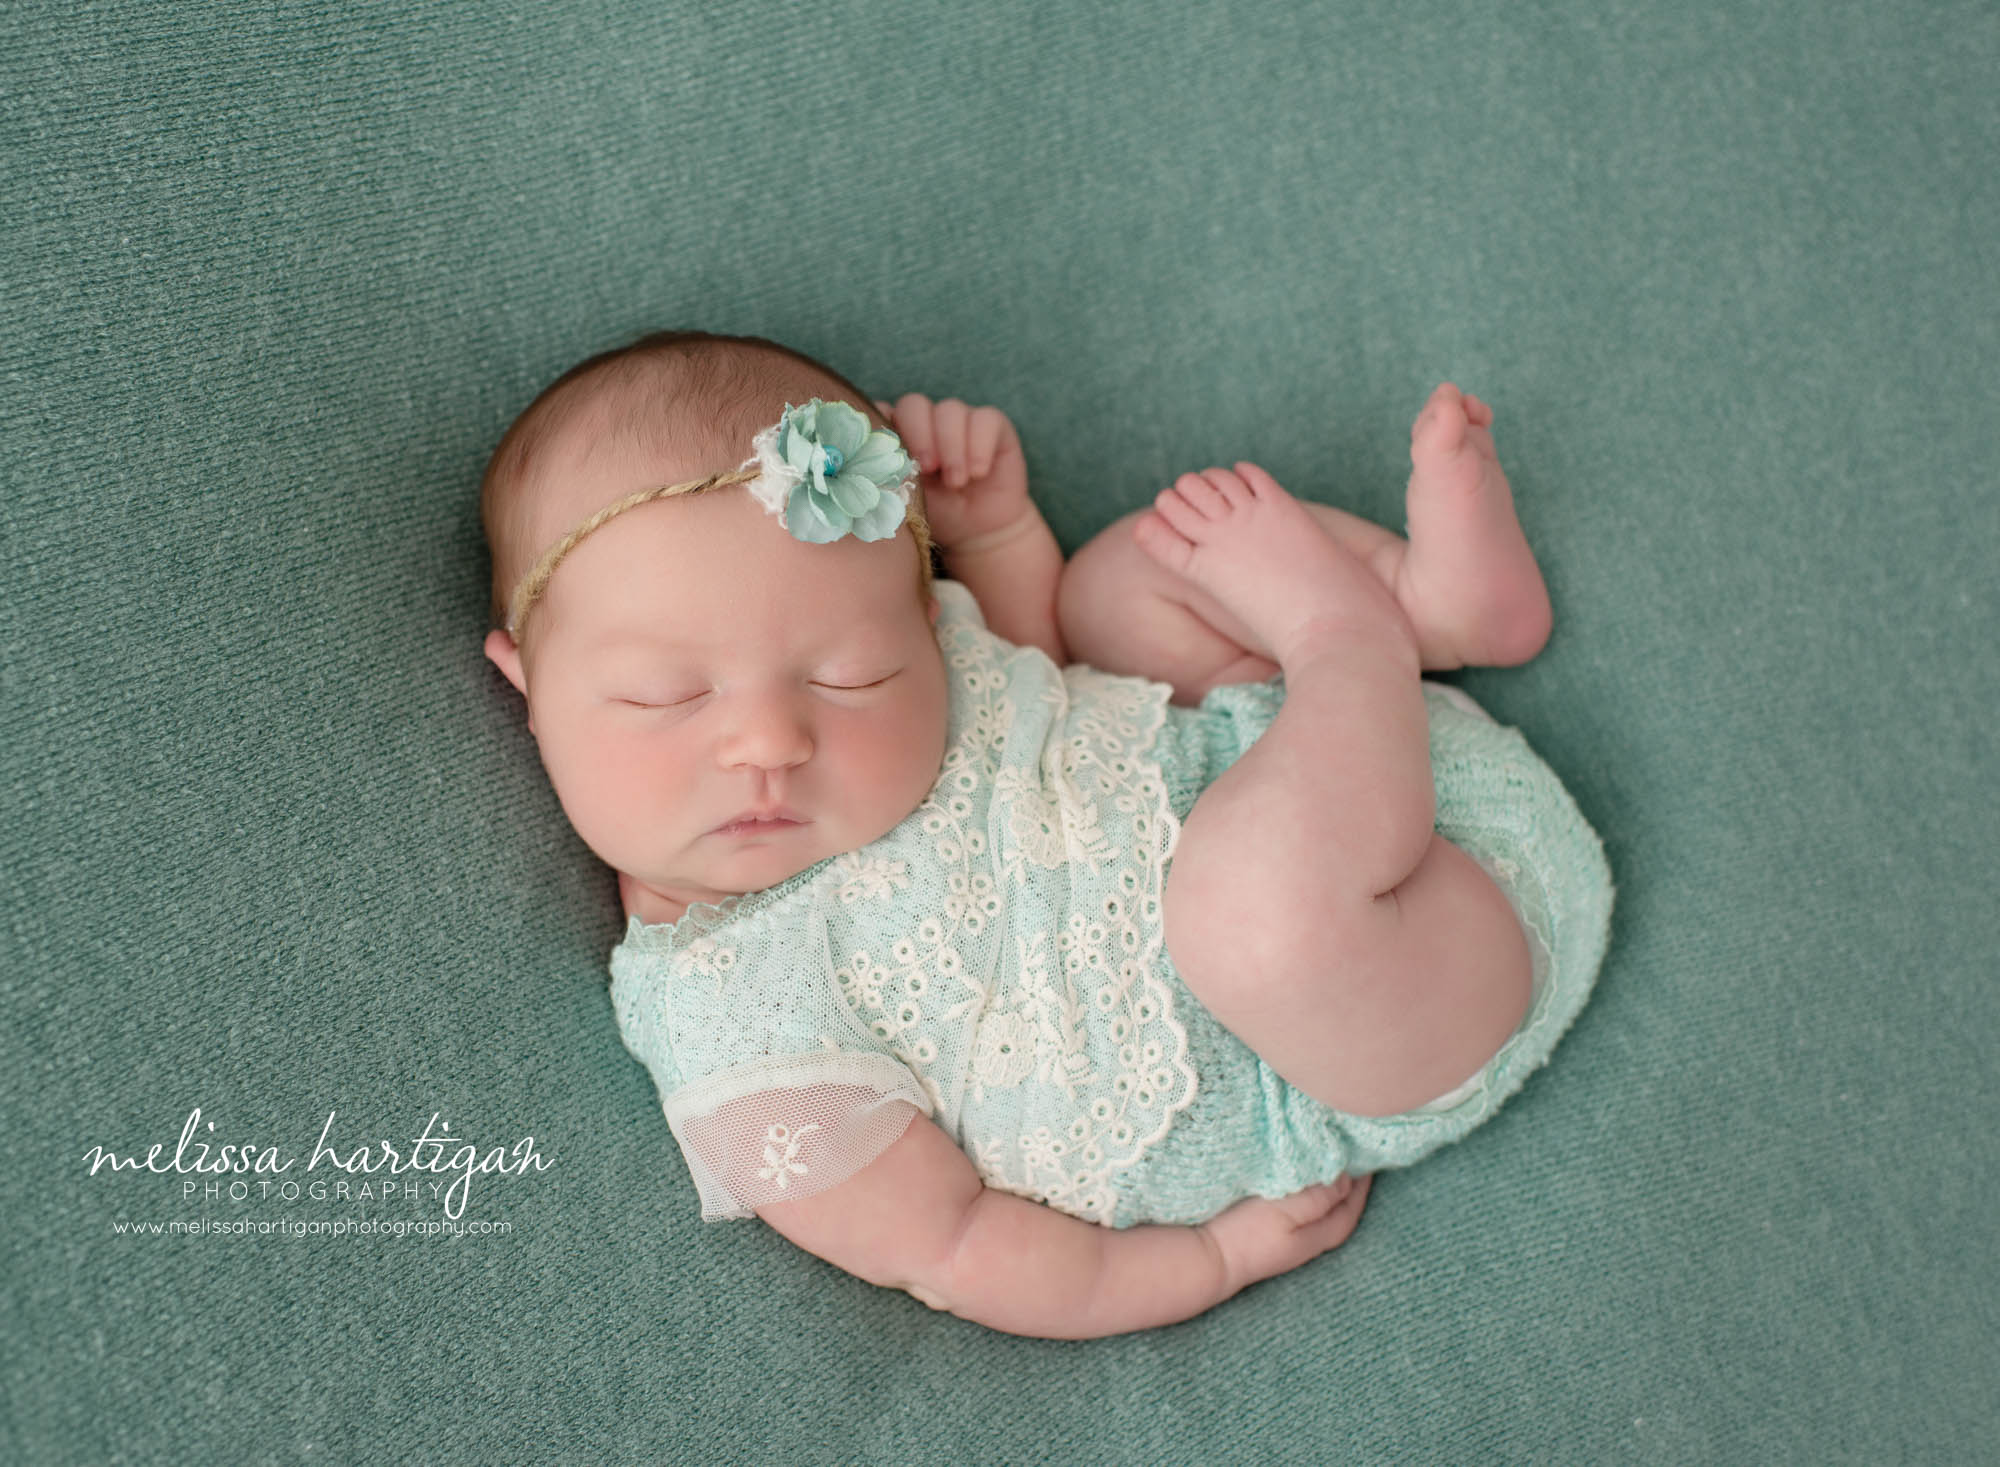 Baby girl posed on back in relaxed pose with teal colored eyelet romper and flower tieback